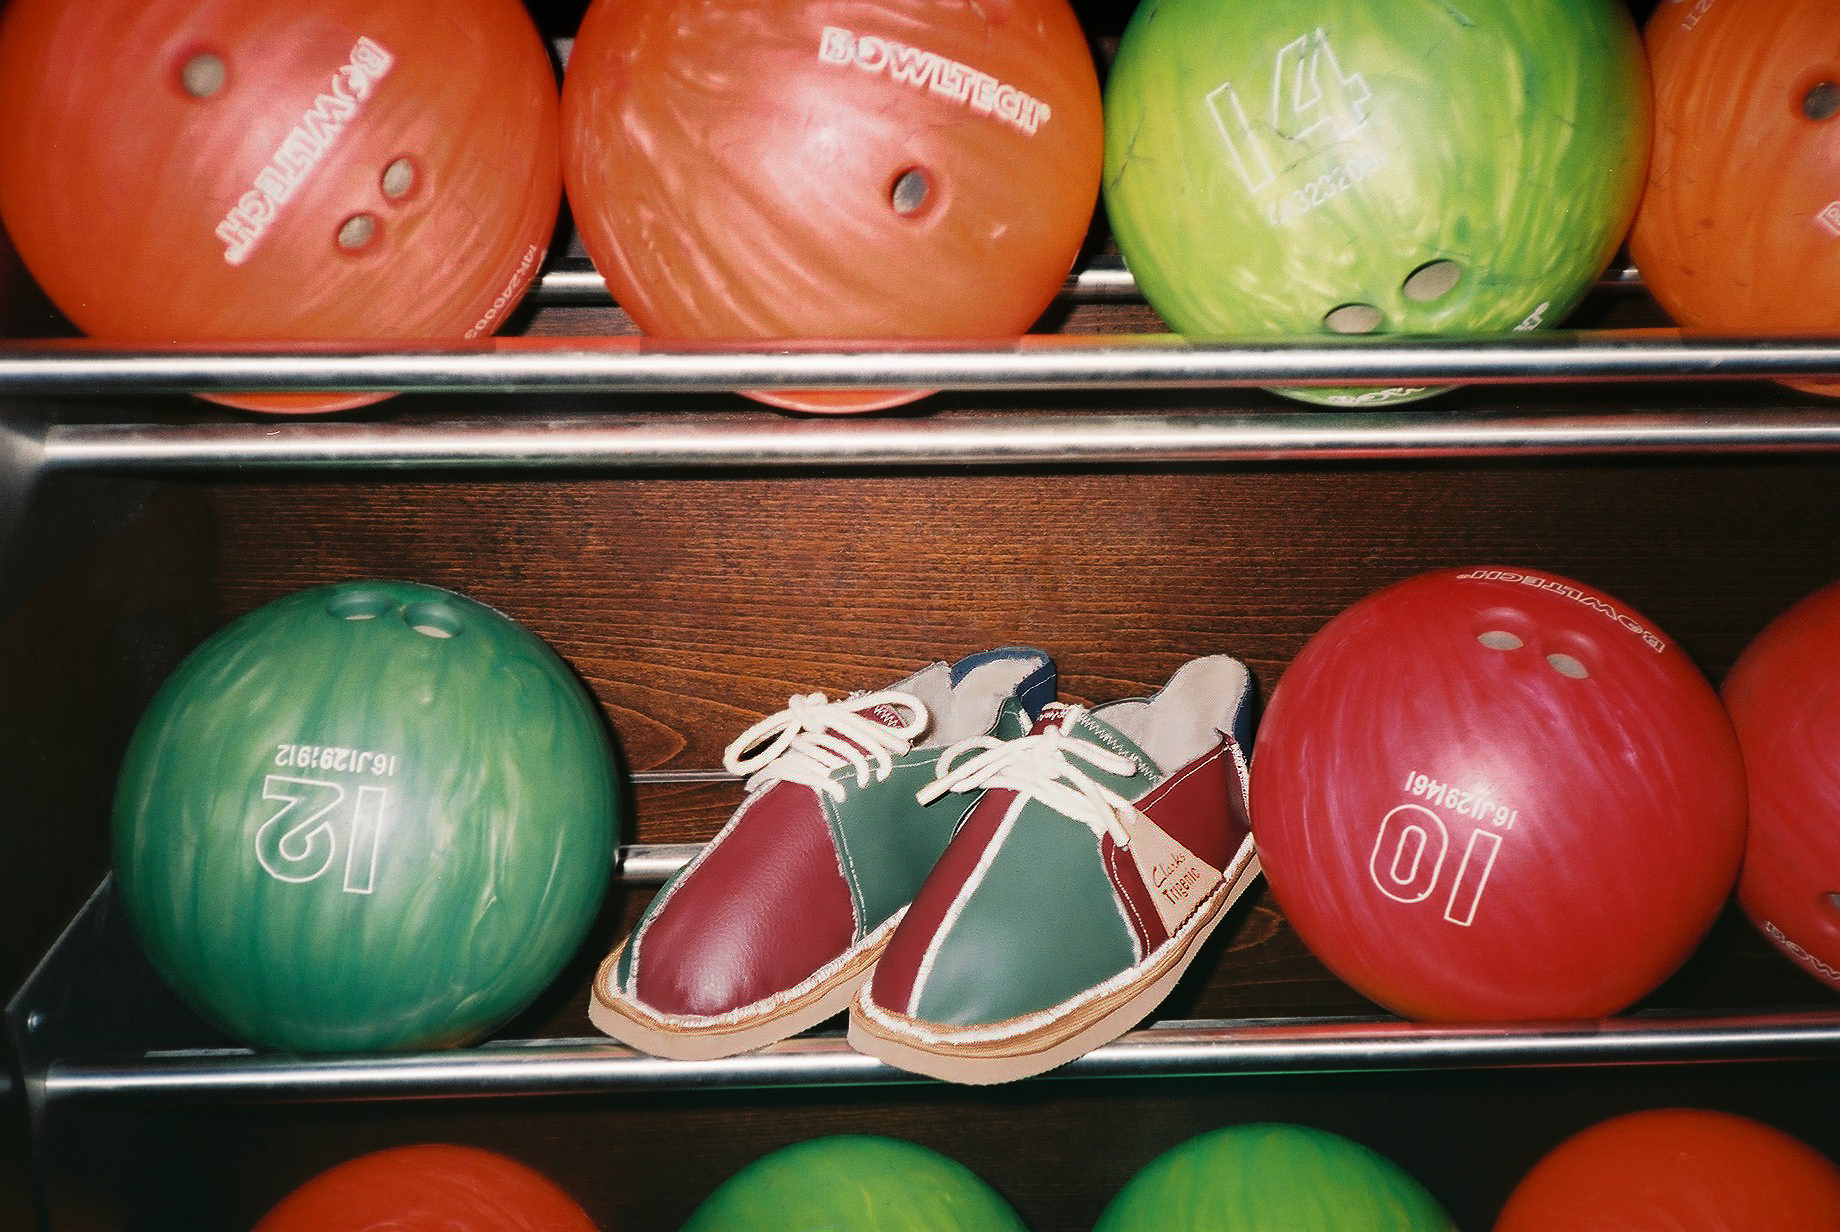 clarks bowling shoes